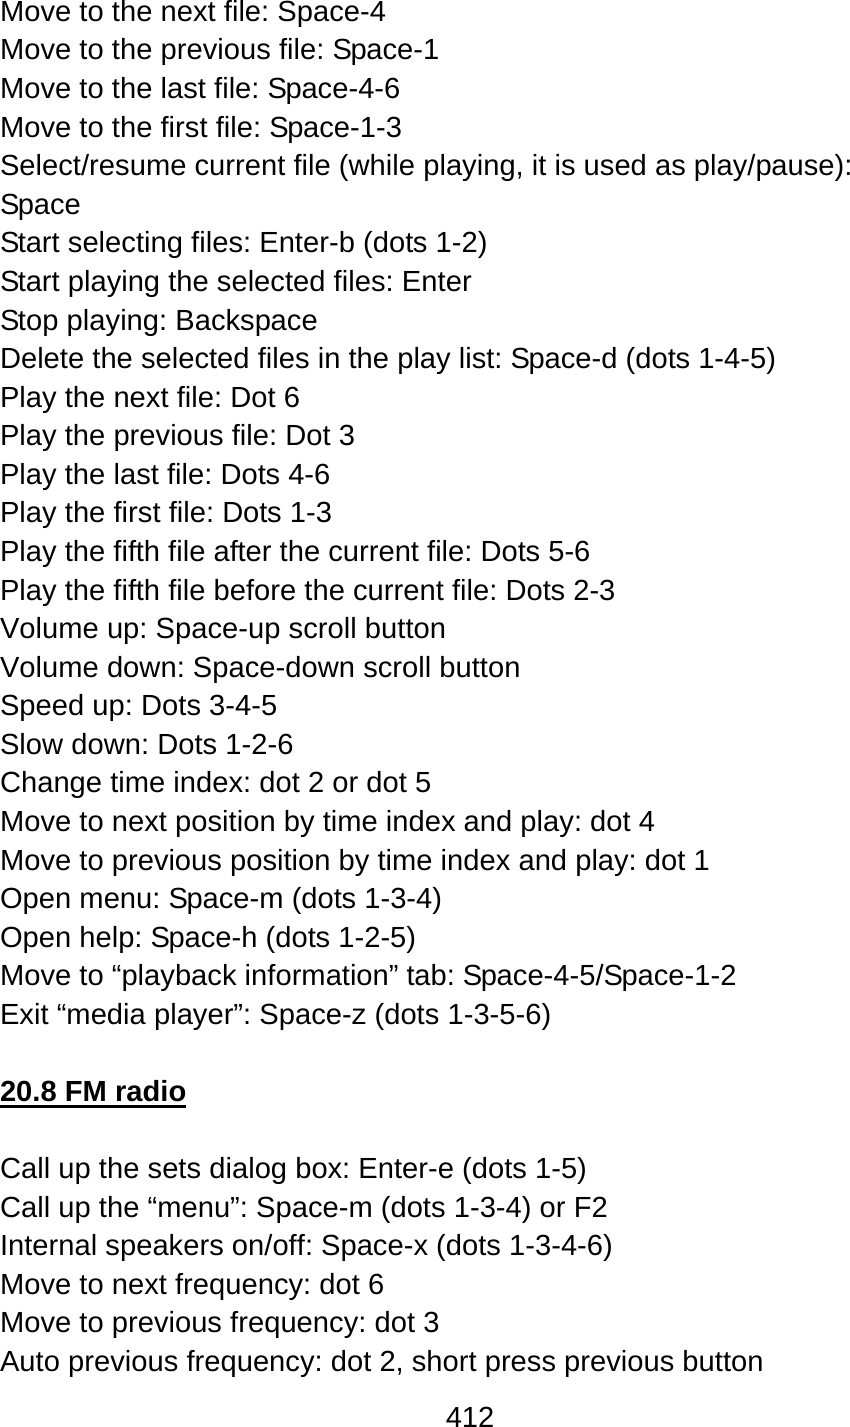 412  Move to the next file: Space-4 Move to the previous file: Space-1 Move to the last file: Space-4-6 Move to the first file: Space-1-3 Select/resume current file (while playing, it is used as play/pause):   Space Start selecting files: Enter-b (dots 1-2) Start playing the selected files: Enter Stop playing: Backspace Delete the selected files in the play list: Space-d (dots 1-4-5) Play the next file: Dot 6 Play the previous file: Dot 3 Play the last file: Dots 4-6 Play the first file: Dots 1-3 Play the fifth file after the current file: Dots 5-6 Play the fifth file before the current file: Dots 2-3 Volume up: Space-up scroll button Volume down: Space-down scroll button Speed up: Dots 3-4-5 Slow down: Dots 1-2-6 Change time index: dot 2 or dot 5 Move to next position by time index and play: dot 4 Move to previous position by time index and play: dot 1 Open menu: Space-m (dots 1-3-4) Open help: Space-h (dots 1-2-5) Move to “playback information” tab: Space-4-5/Space-1-2 Exit “media player”: Space-z (dots 1-3-5-6)  20.8 FM radio  Call up the sets dialog box: Enter-e (dots 1-5) Call up the “menu”: Space-m (dots 1-3-4) or F2 Internal speakers on/off: Space-x (dots 1-3-4-6) Move to next frequency: dot 6 Move to previous frequency: dot 3 Auto previous frequency: dot 2, short press previous button 